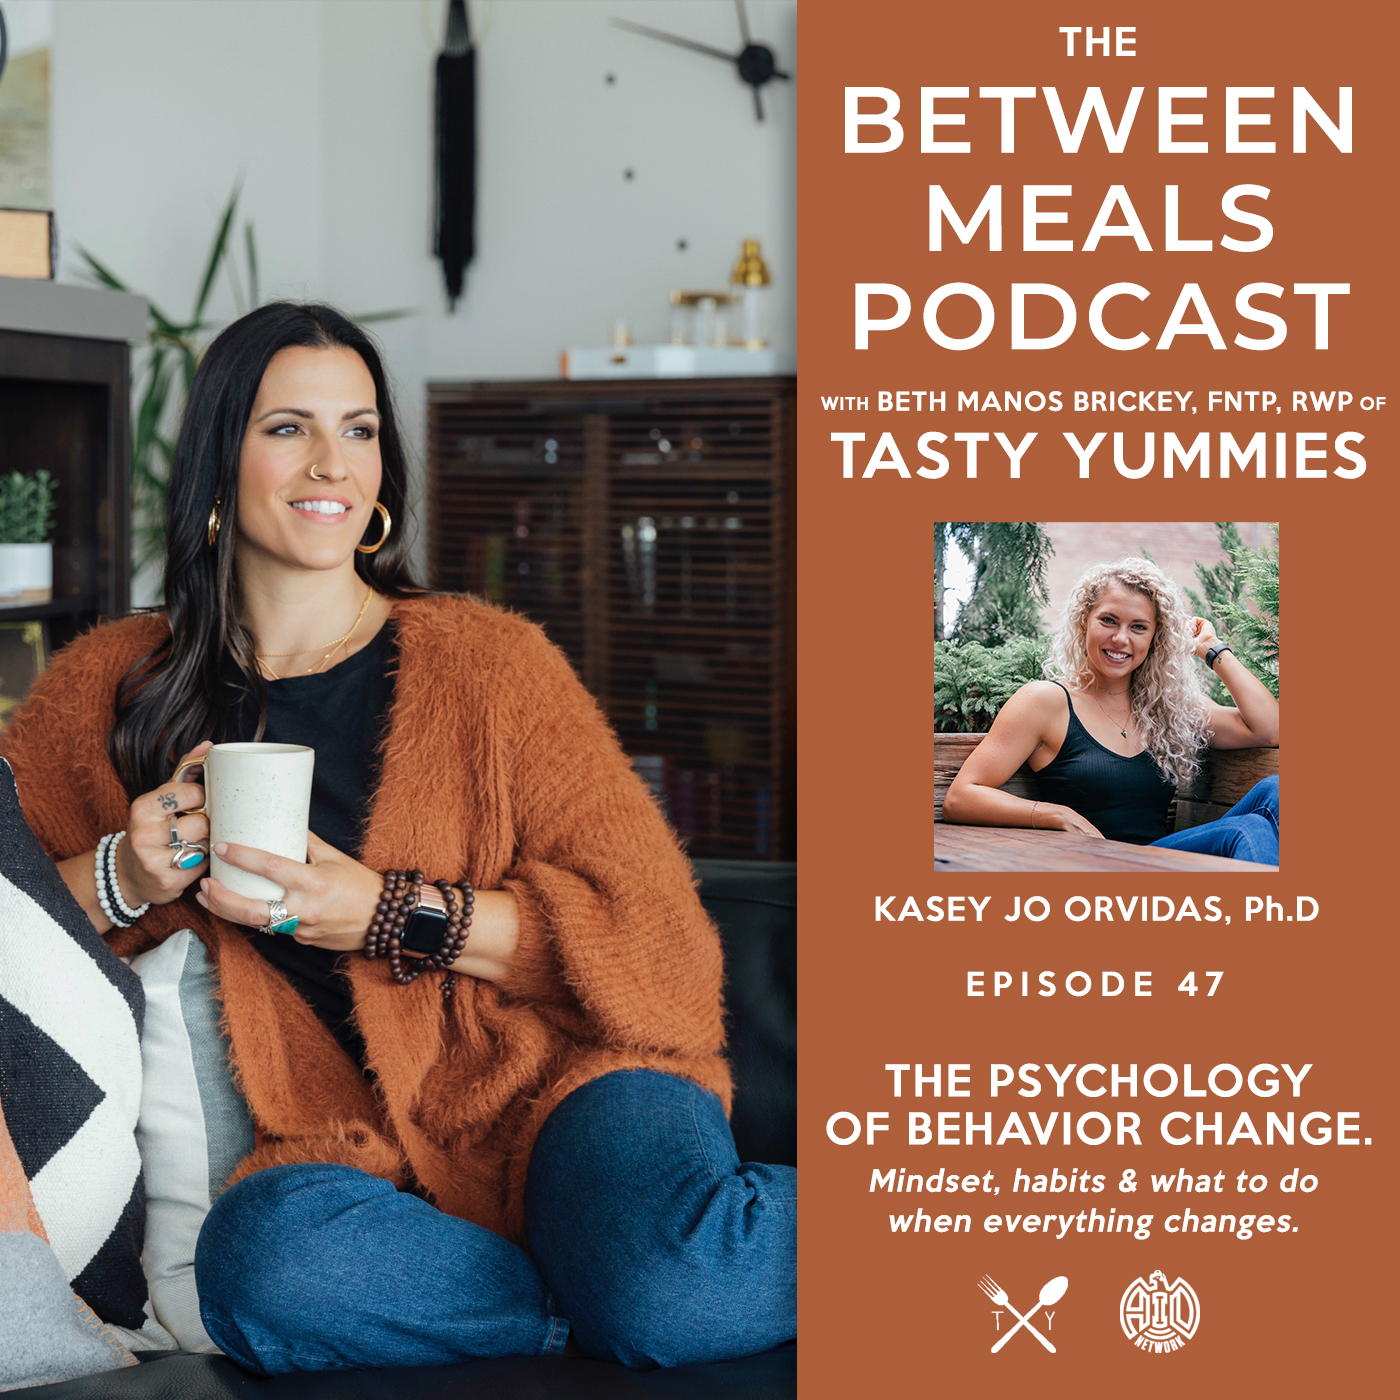 Between Meals Podcast. Episode 47: Title: No 47 | The Psychology of Behavior Change with Kasey Jo Orvidas, Ph.D. Mindset, habits and what to do when everything changes.